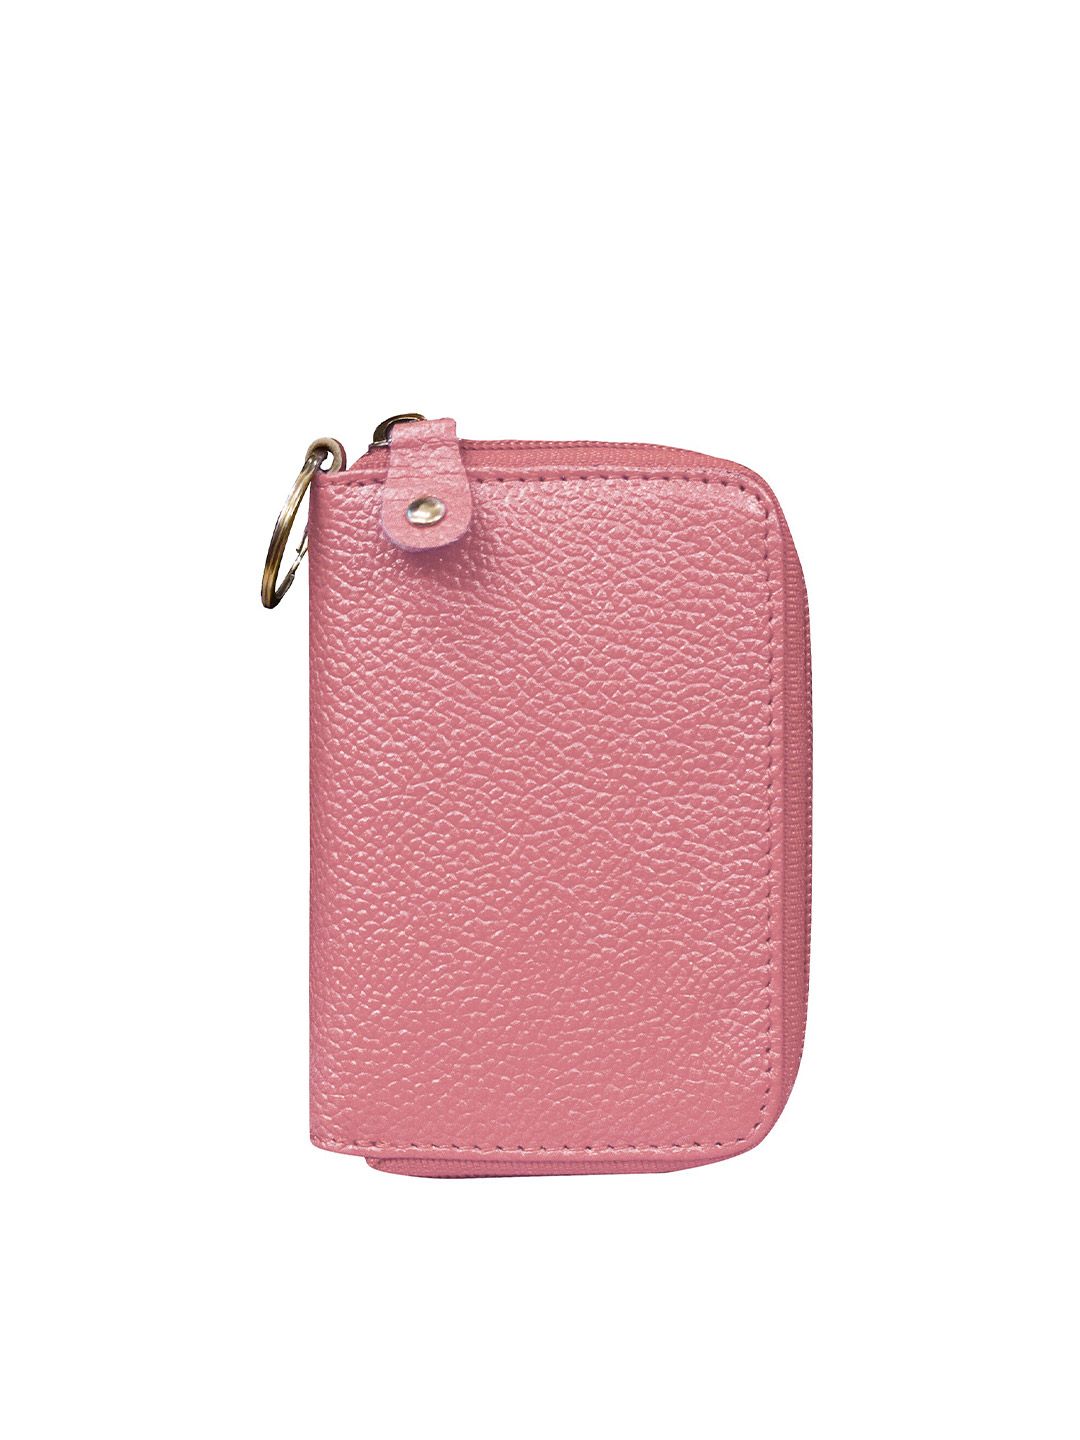 ABYS Unisex Pink Leather Card Holder Price in India